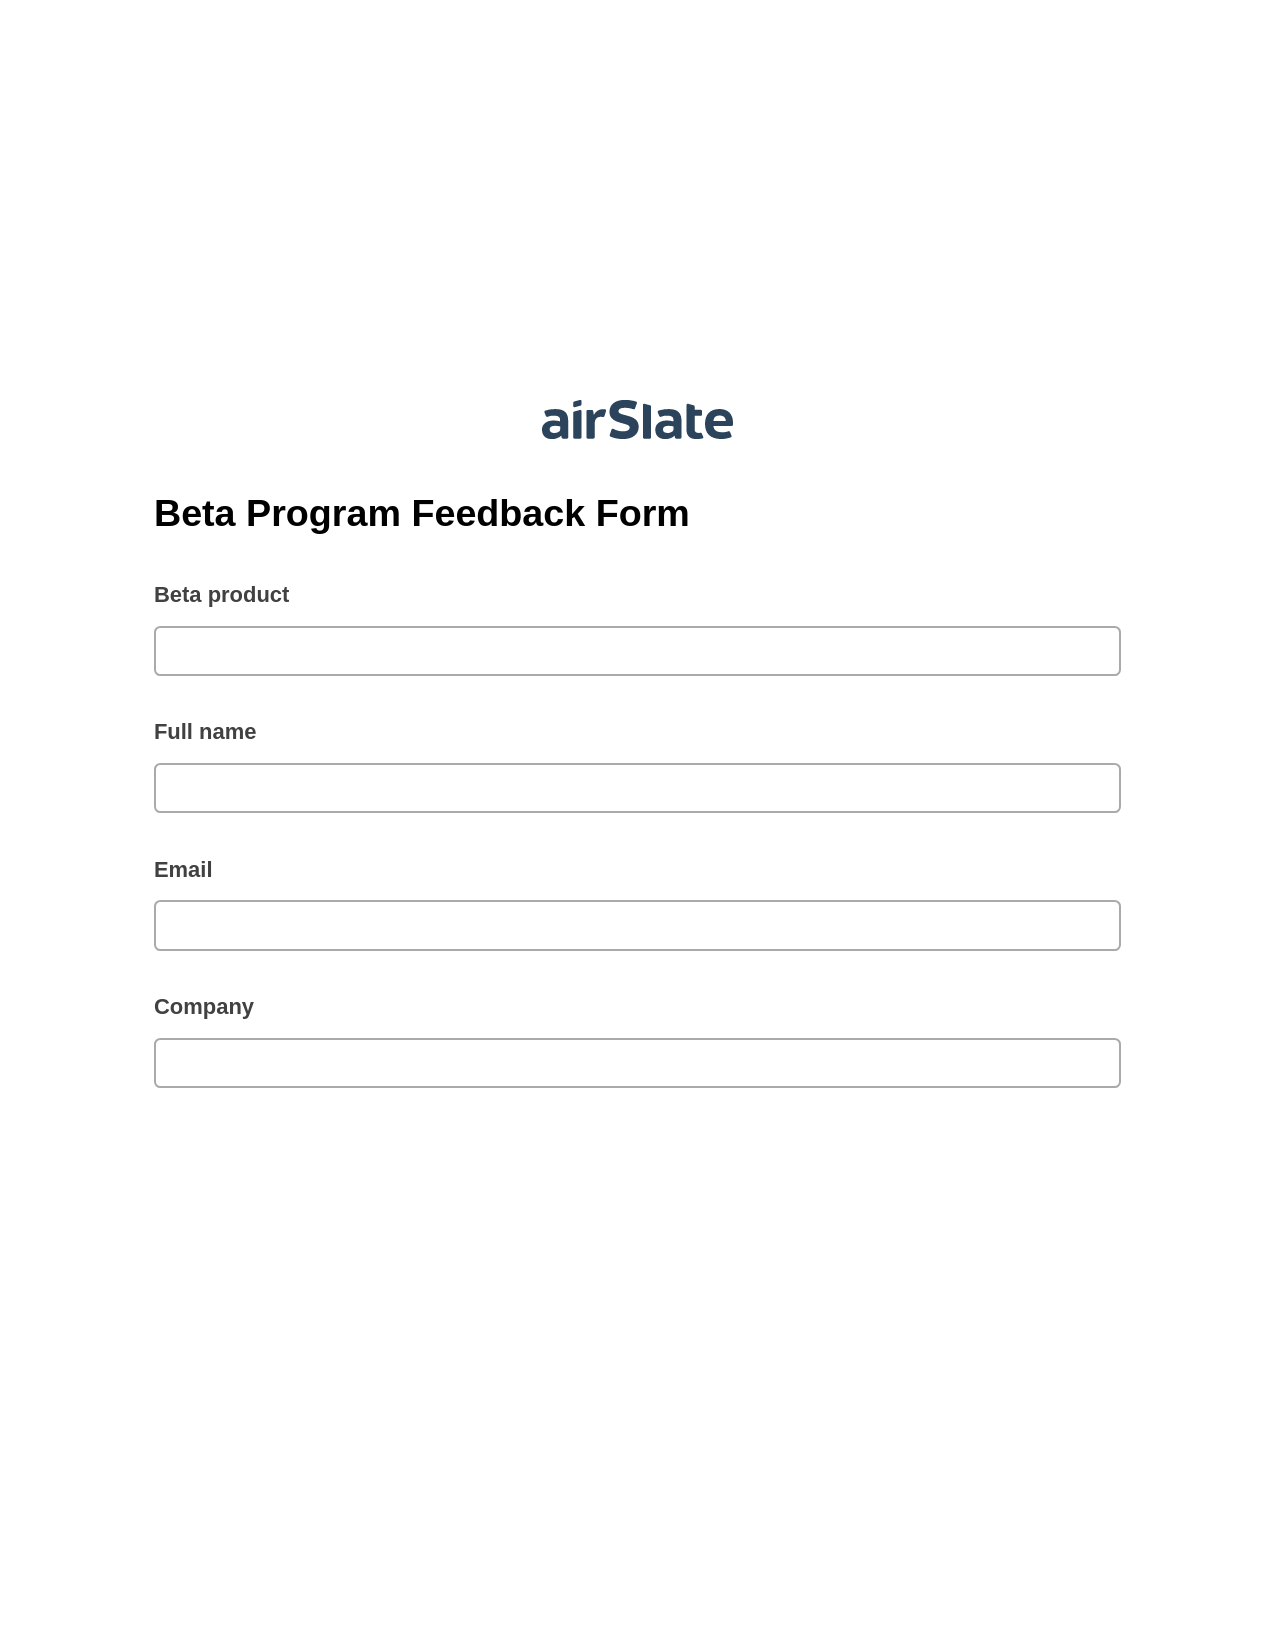 Beta Program Feedback Form Pre-fill from NetSuite Records Bot, Send Mailchimp Campaign Bot, Export to Smartsheet